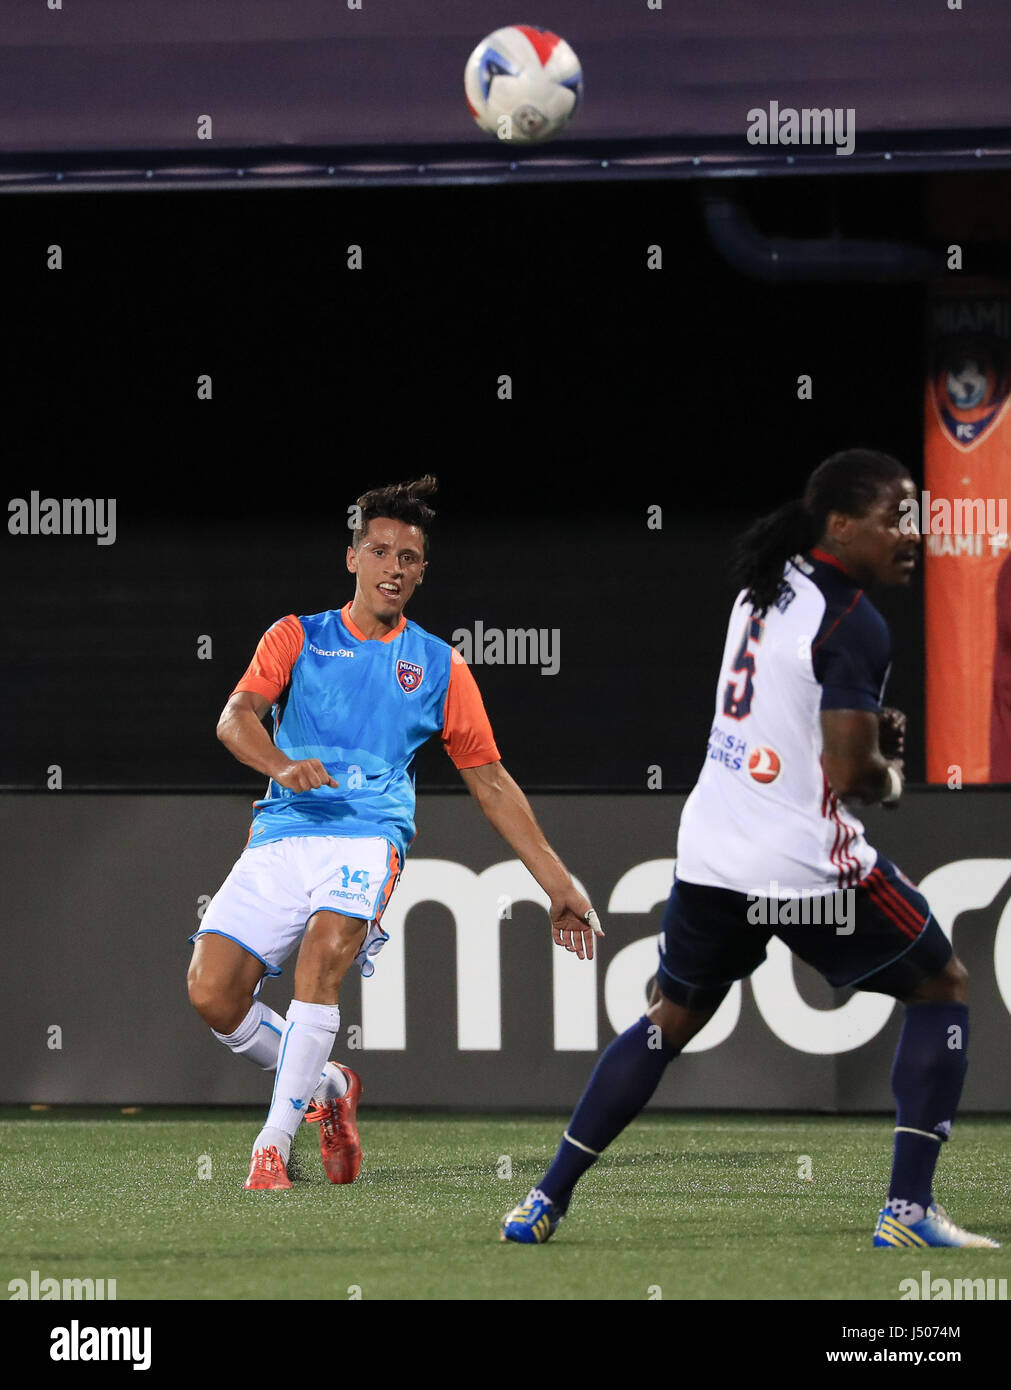 Miami, Florida, USA. 13th May, 2017. Miami FC midfielder Robert Baggio Kcira (14) takes a shot past Indy Eleven defender Lovel Palmer (5) during the first half a North American Soccer League game between Indy Eleven vs Miami FC at the Riccardo Silva Stadium in Miami, Florida. Miami FC won 3-2. Credit: csm/Alamy Live News Stock Photo